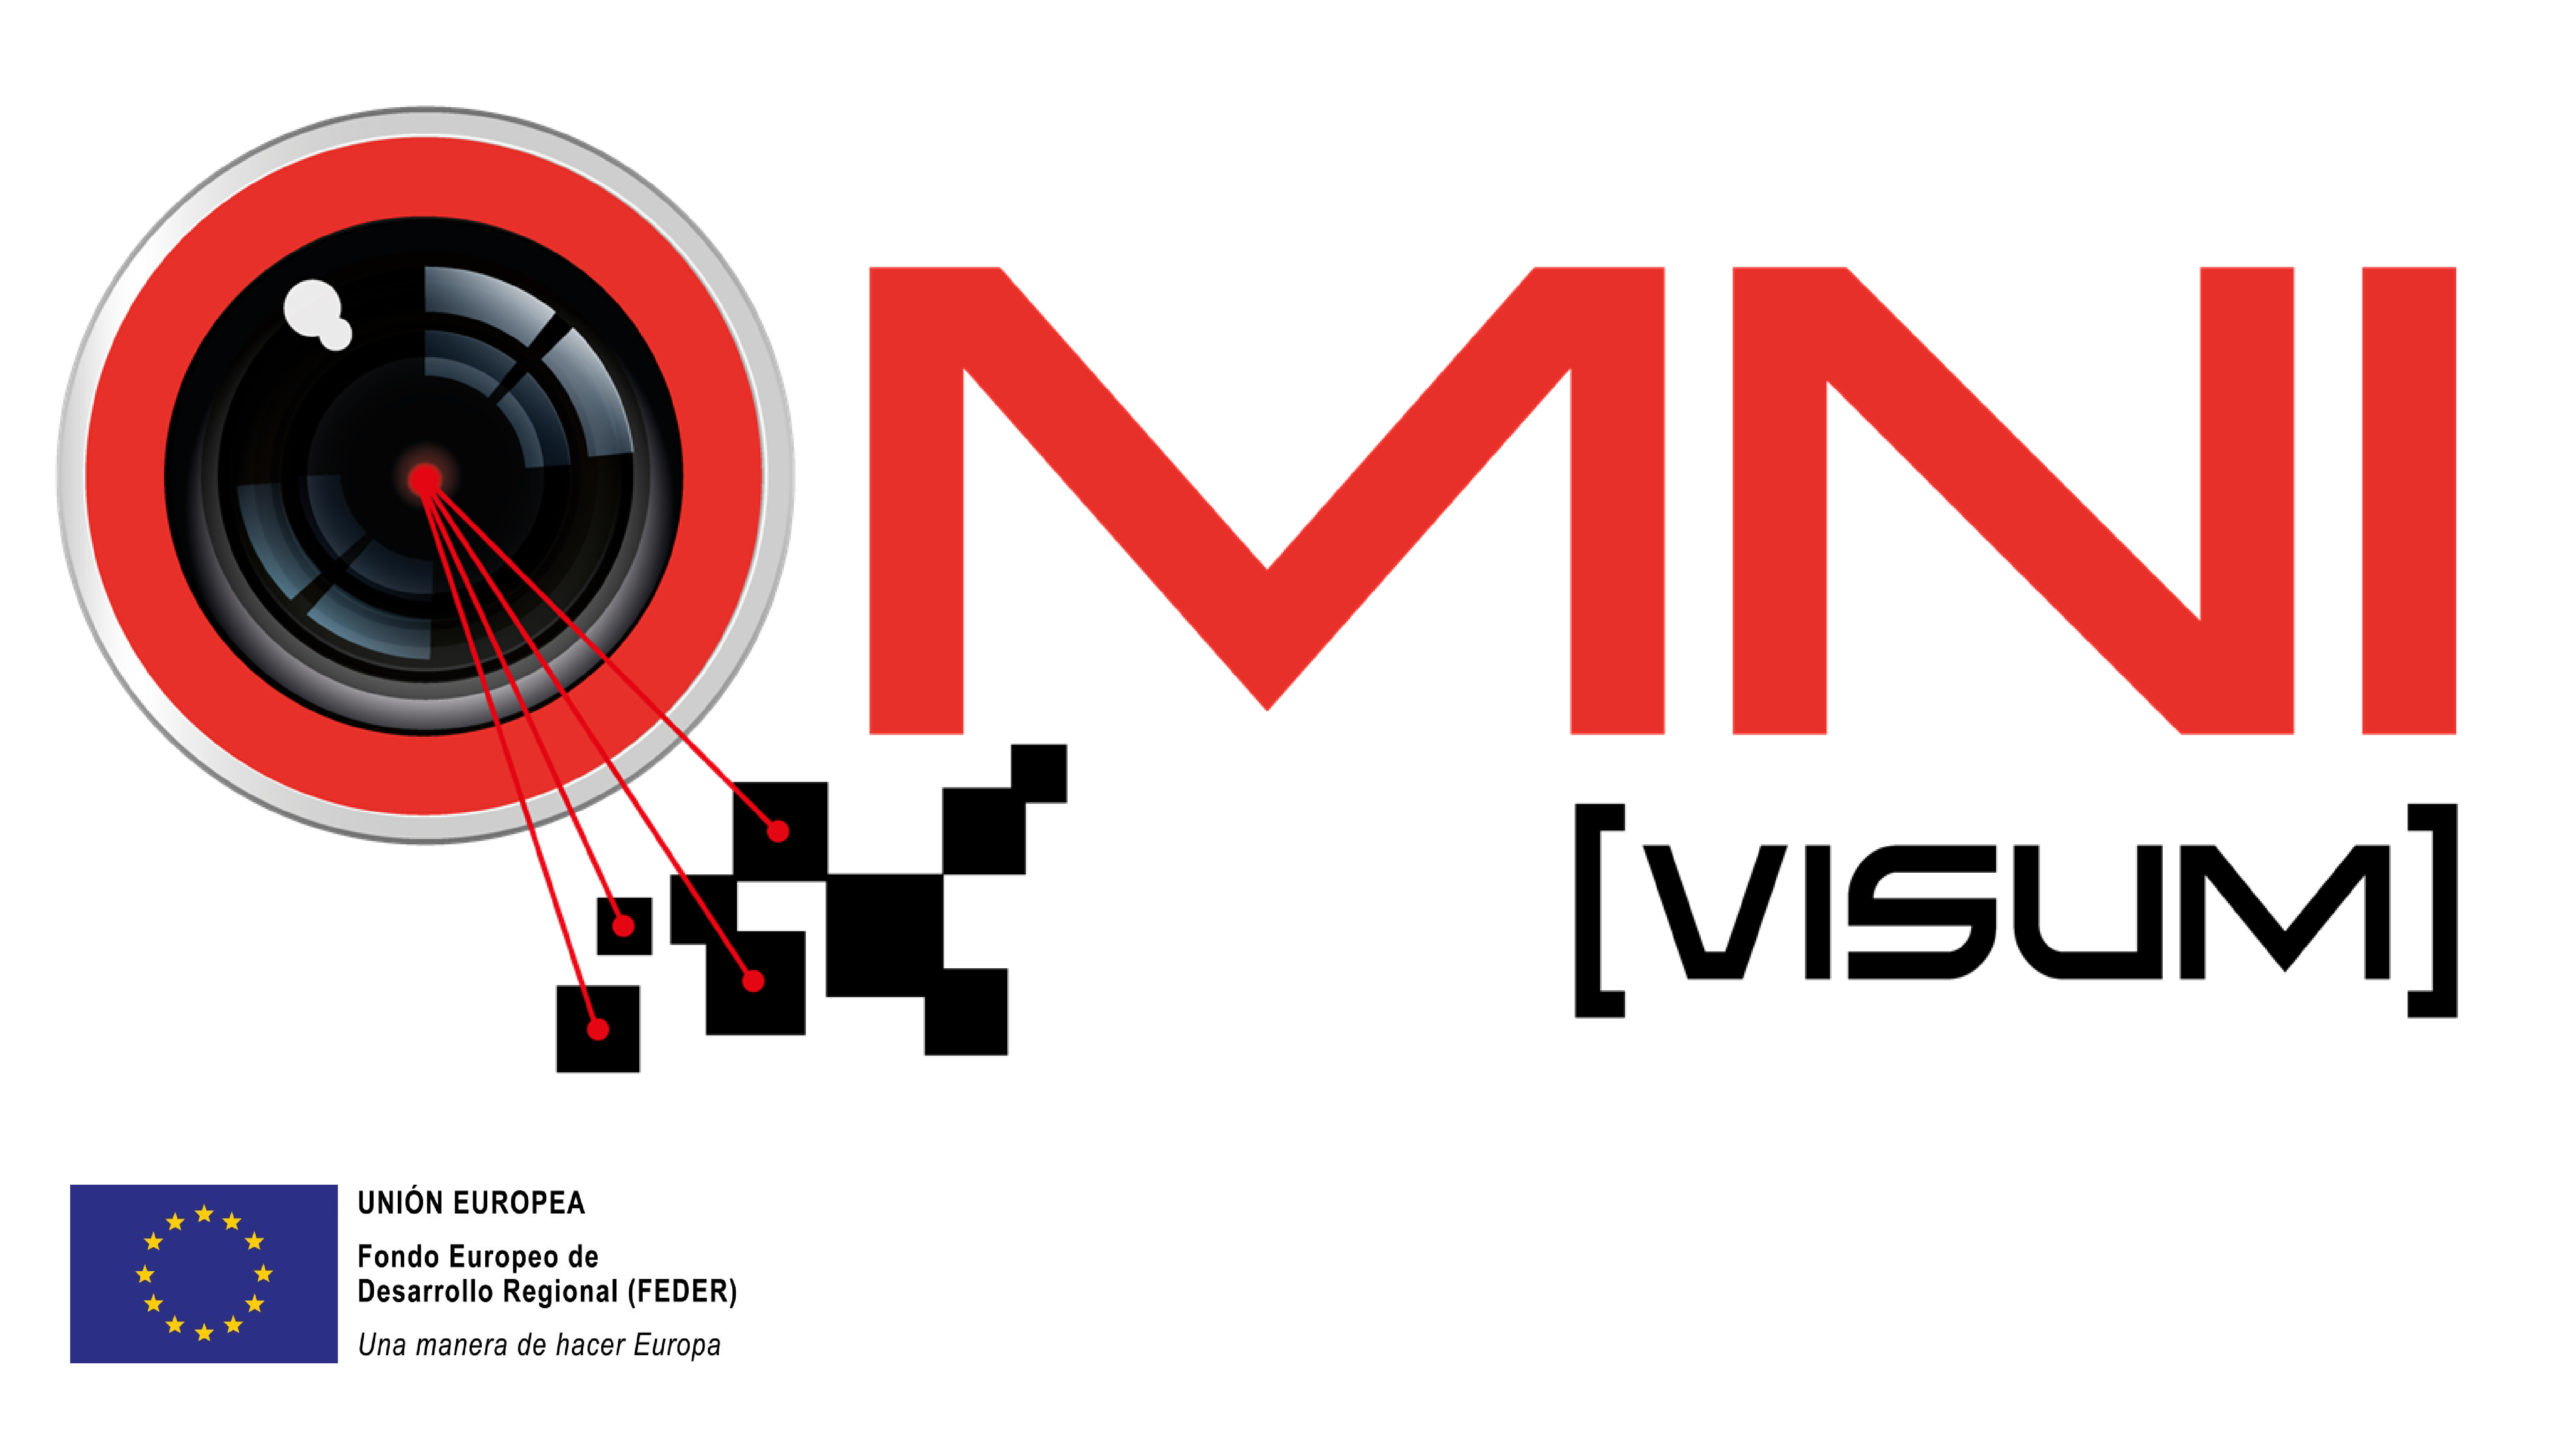 Multiscan Technologies launches the OMNI (VISUM) project